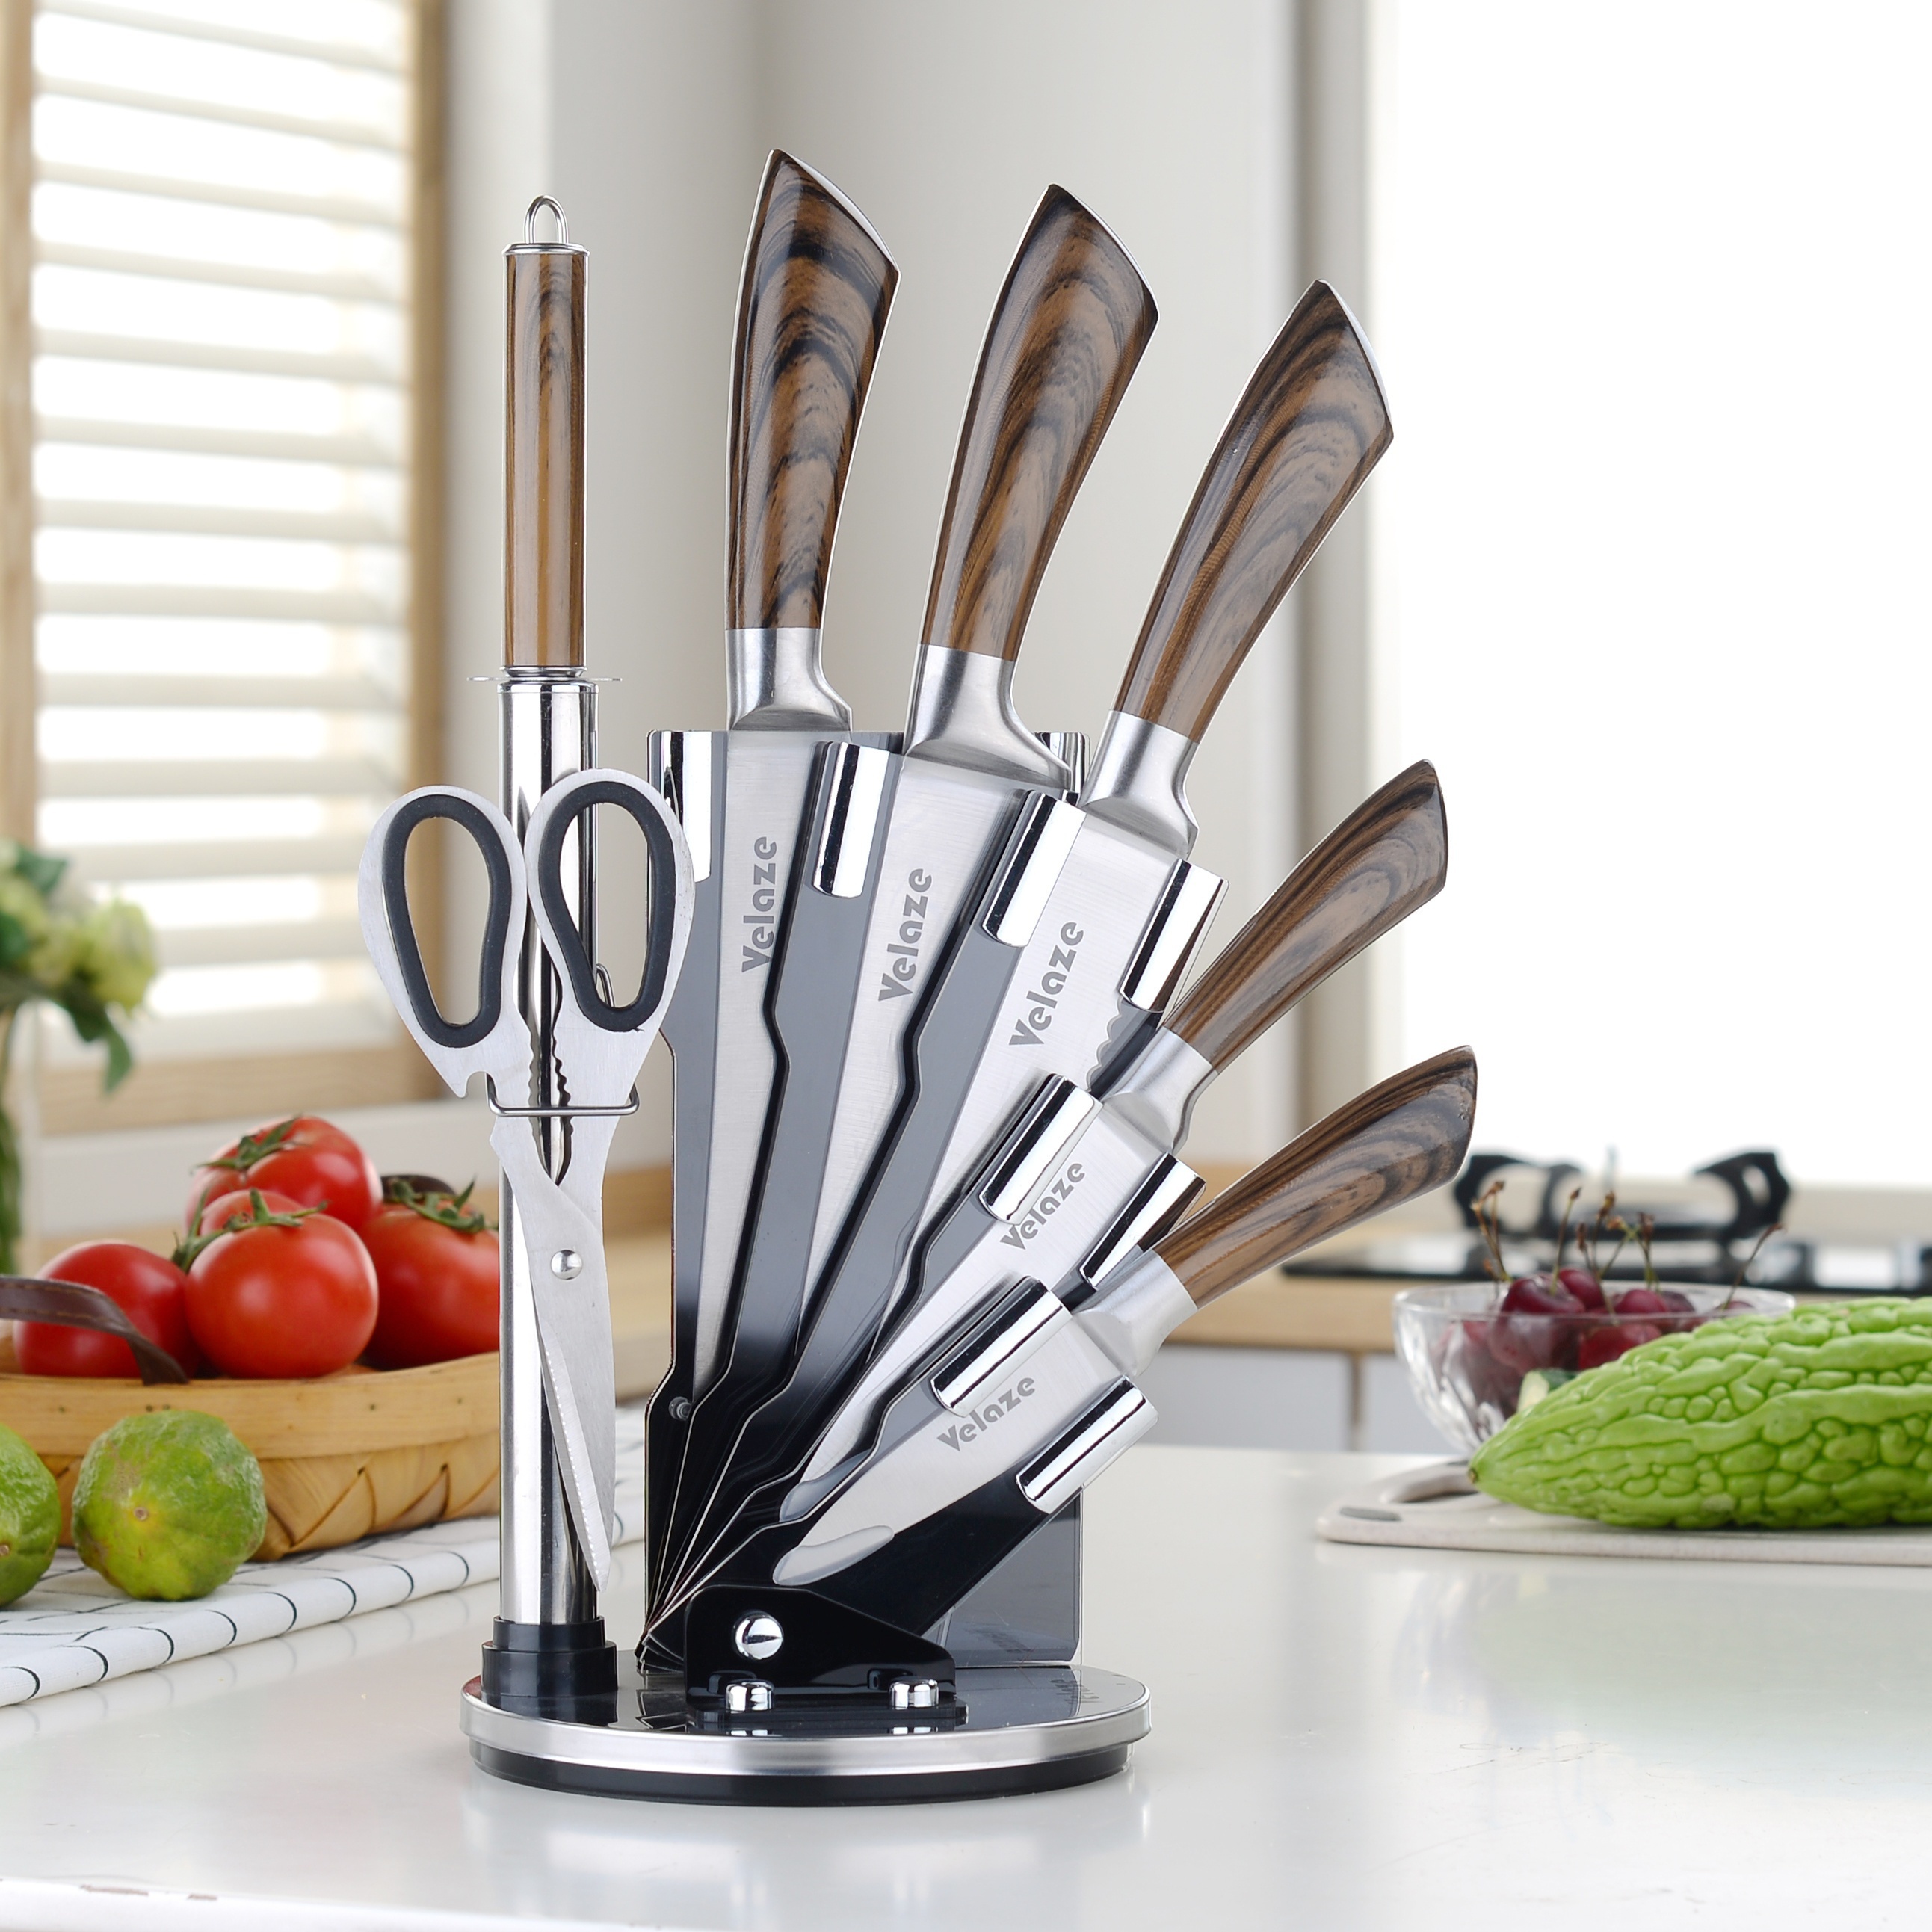 

8pcs/set, Knives Set, Knife Set With Stand, Stainless Steel Kitchen Knives With Brown Handles, Durable Cutting Knfie, Home Cooking Essentials, Kitchen Stuff